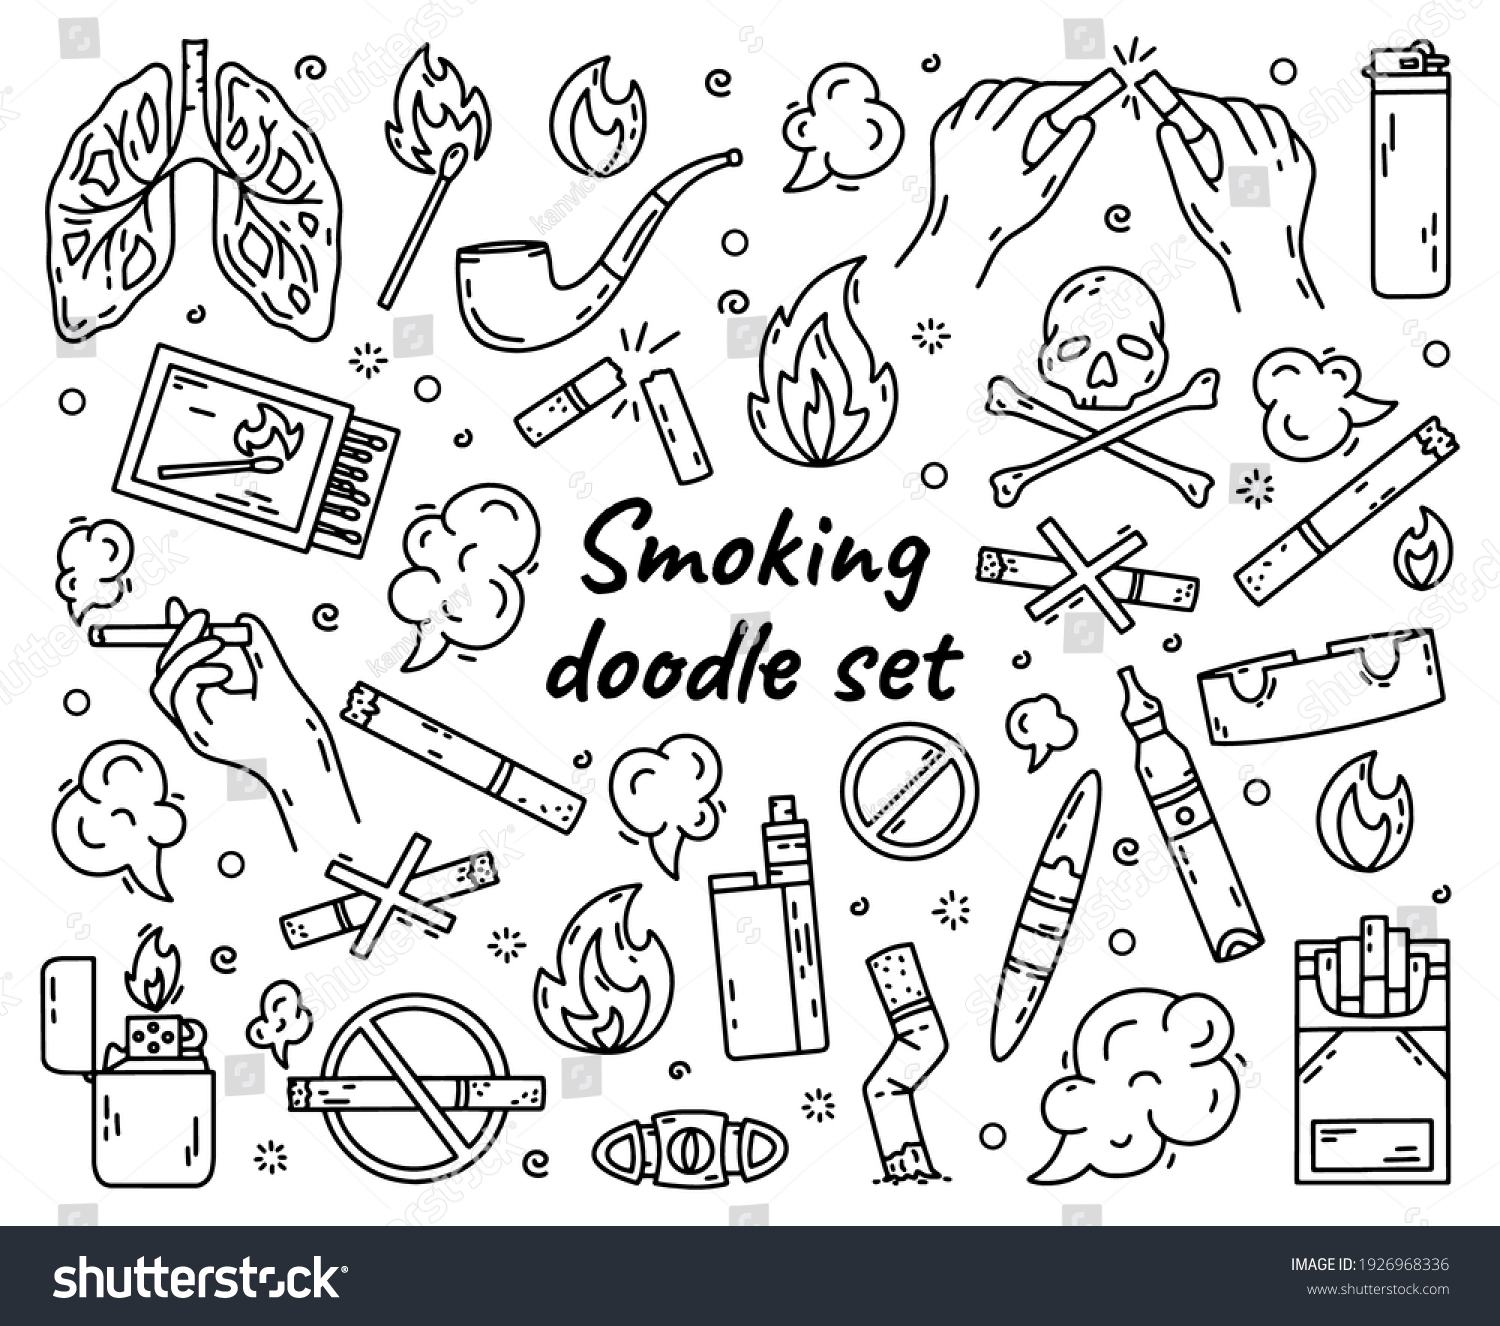 Cigarette Smoking Outline Vector Set Doodle Stock Vector (Royalty Free ...